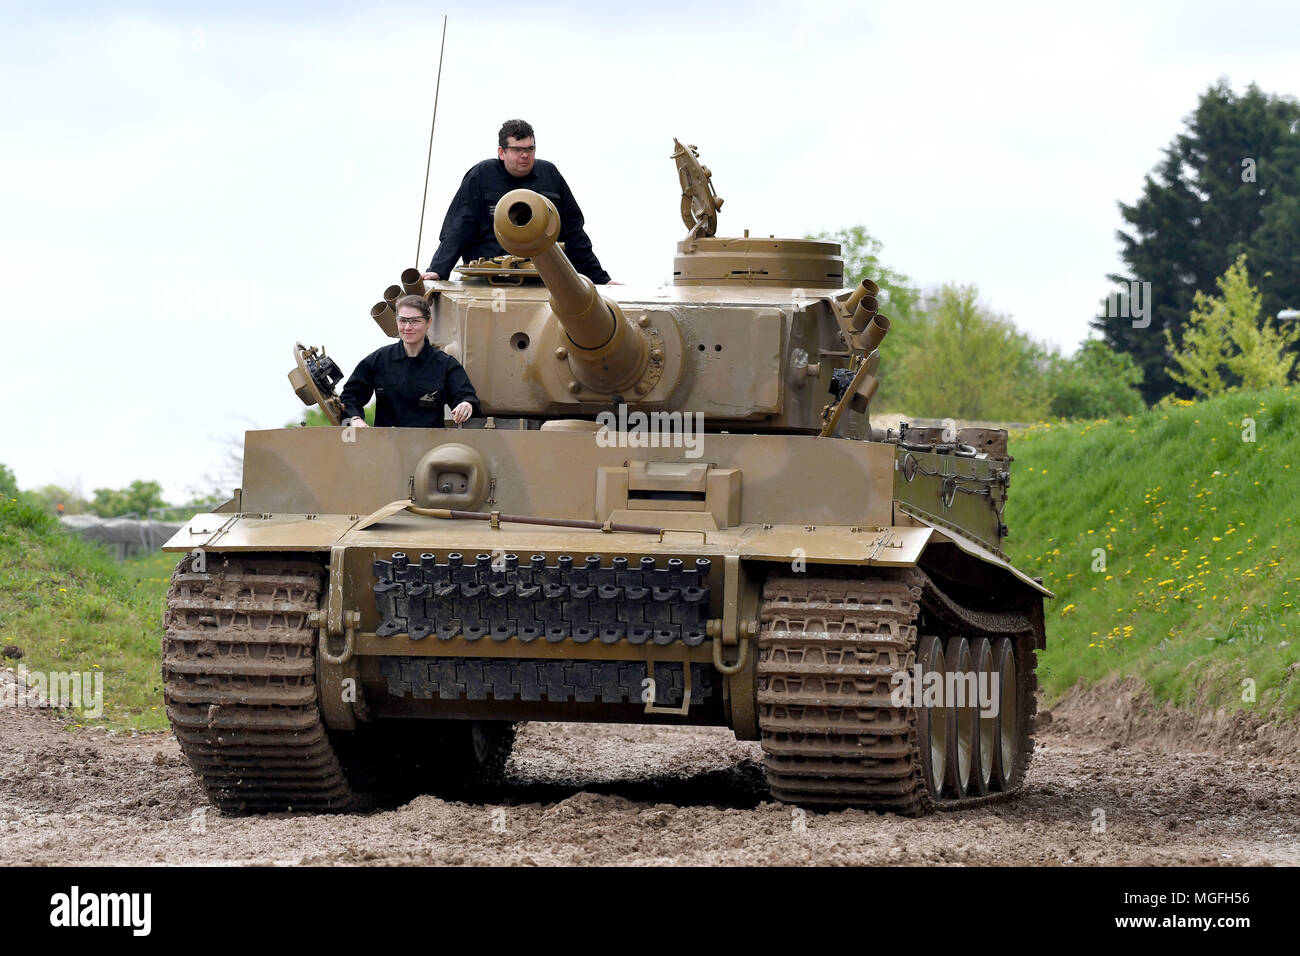 Tiger 131, world-famous Second World War tank, the only operating Tiger I in the world, takes to the parade ground at Bovington Tank Museum, Dorset. Credit: Finnbarr Webster/Alamy Live News Stock Photo